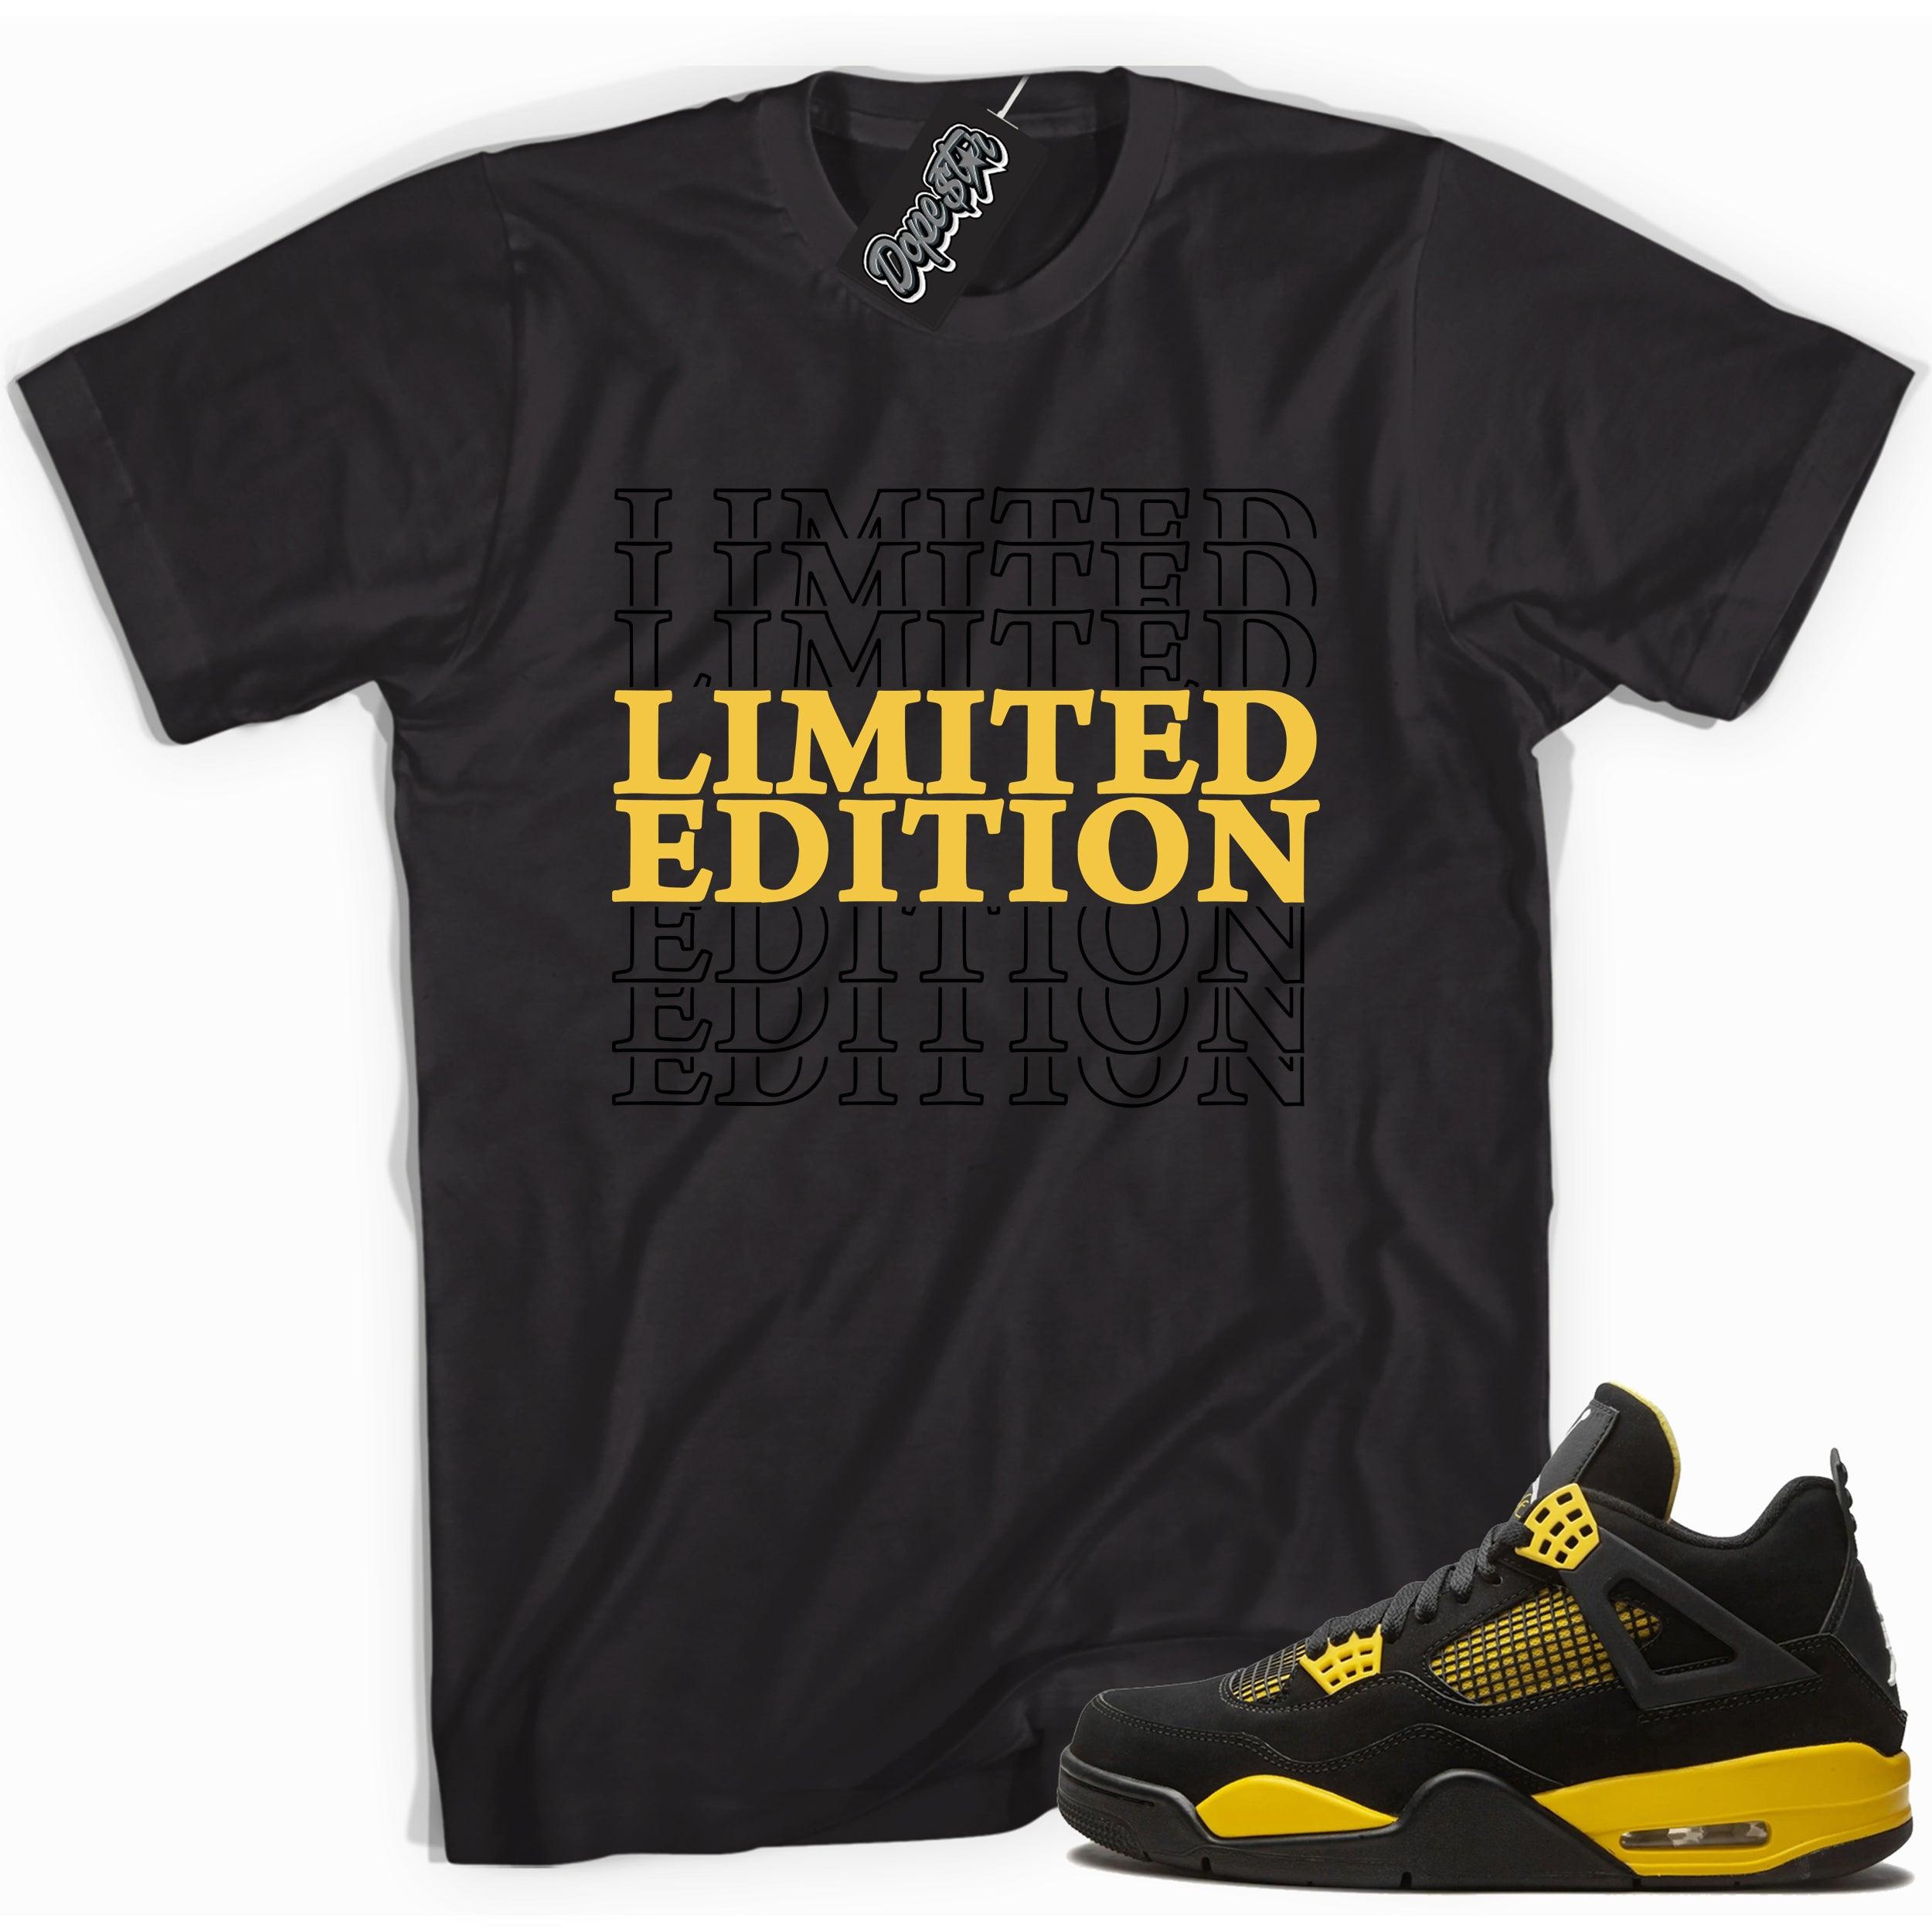 Cool black graphic tee with 'limited edition' print, that perfectly matches  Air Jordan 4 Thunder sneakers